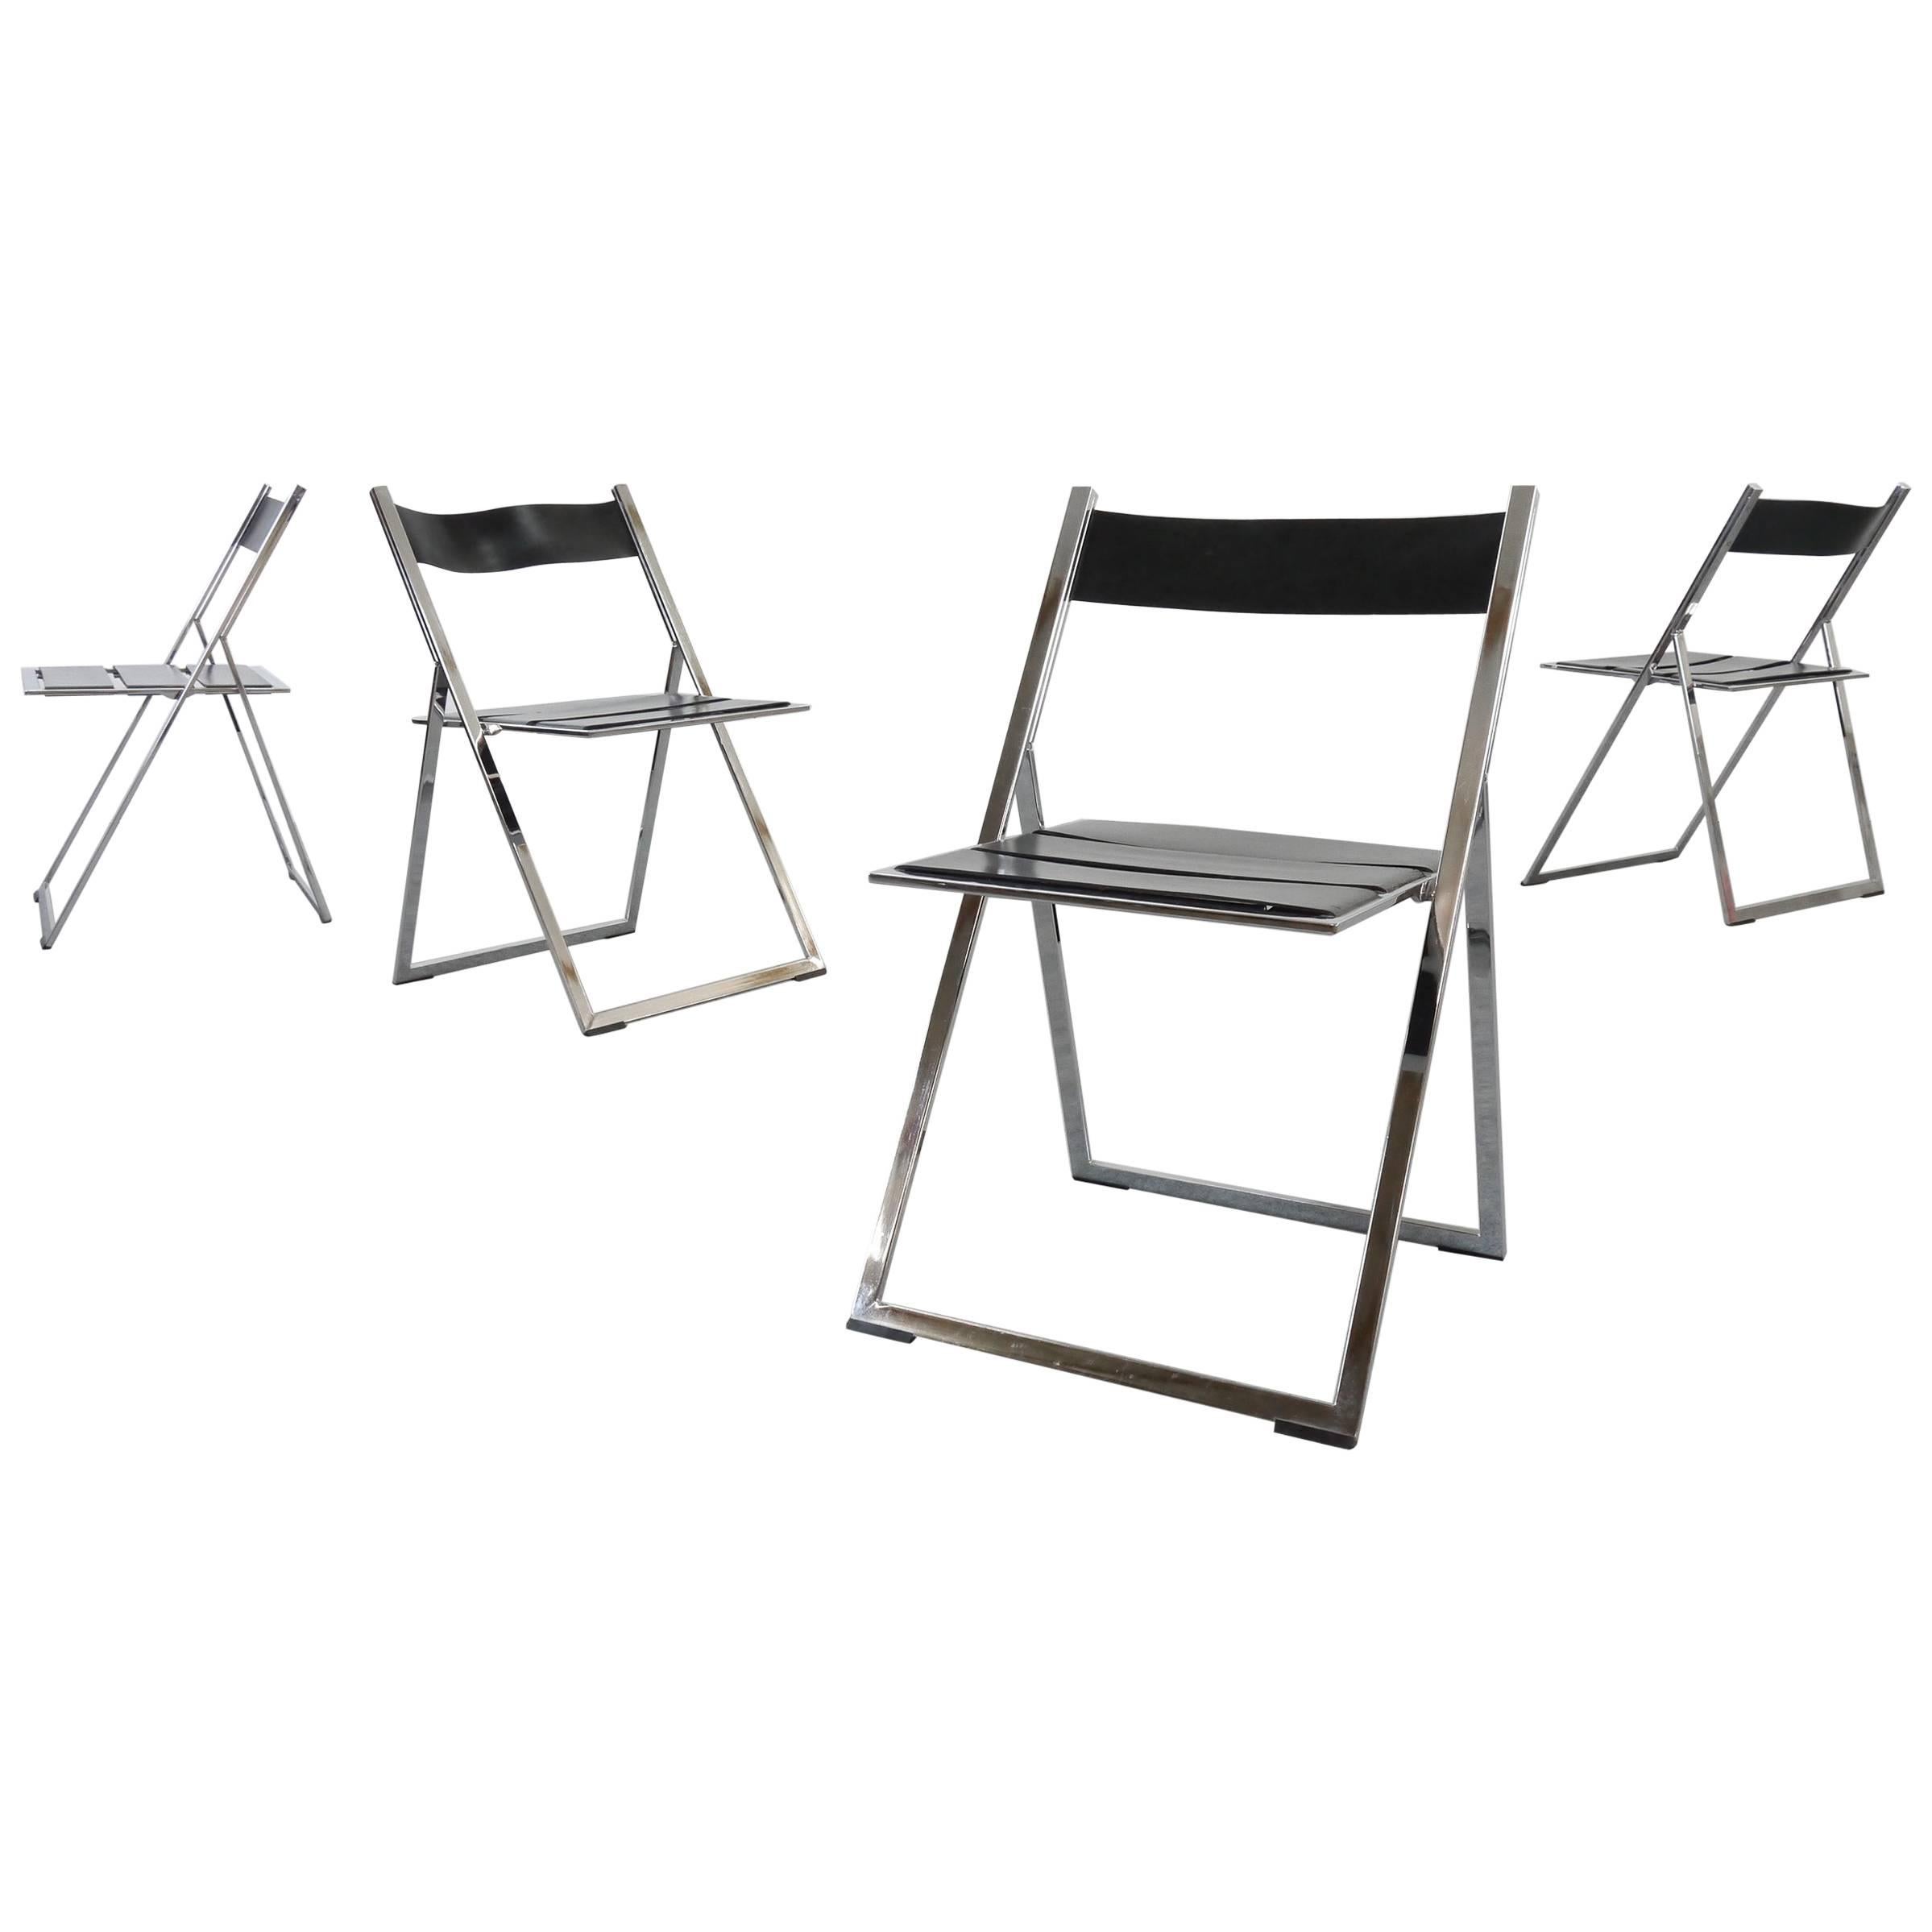 Set of Four Vono/Elios Folding Chairs-Dining Chairs by Lübke Leather and Chrome